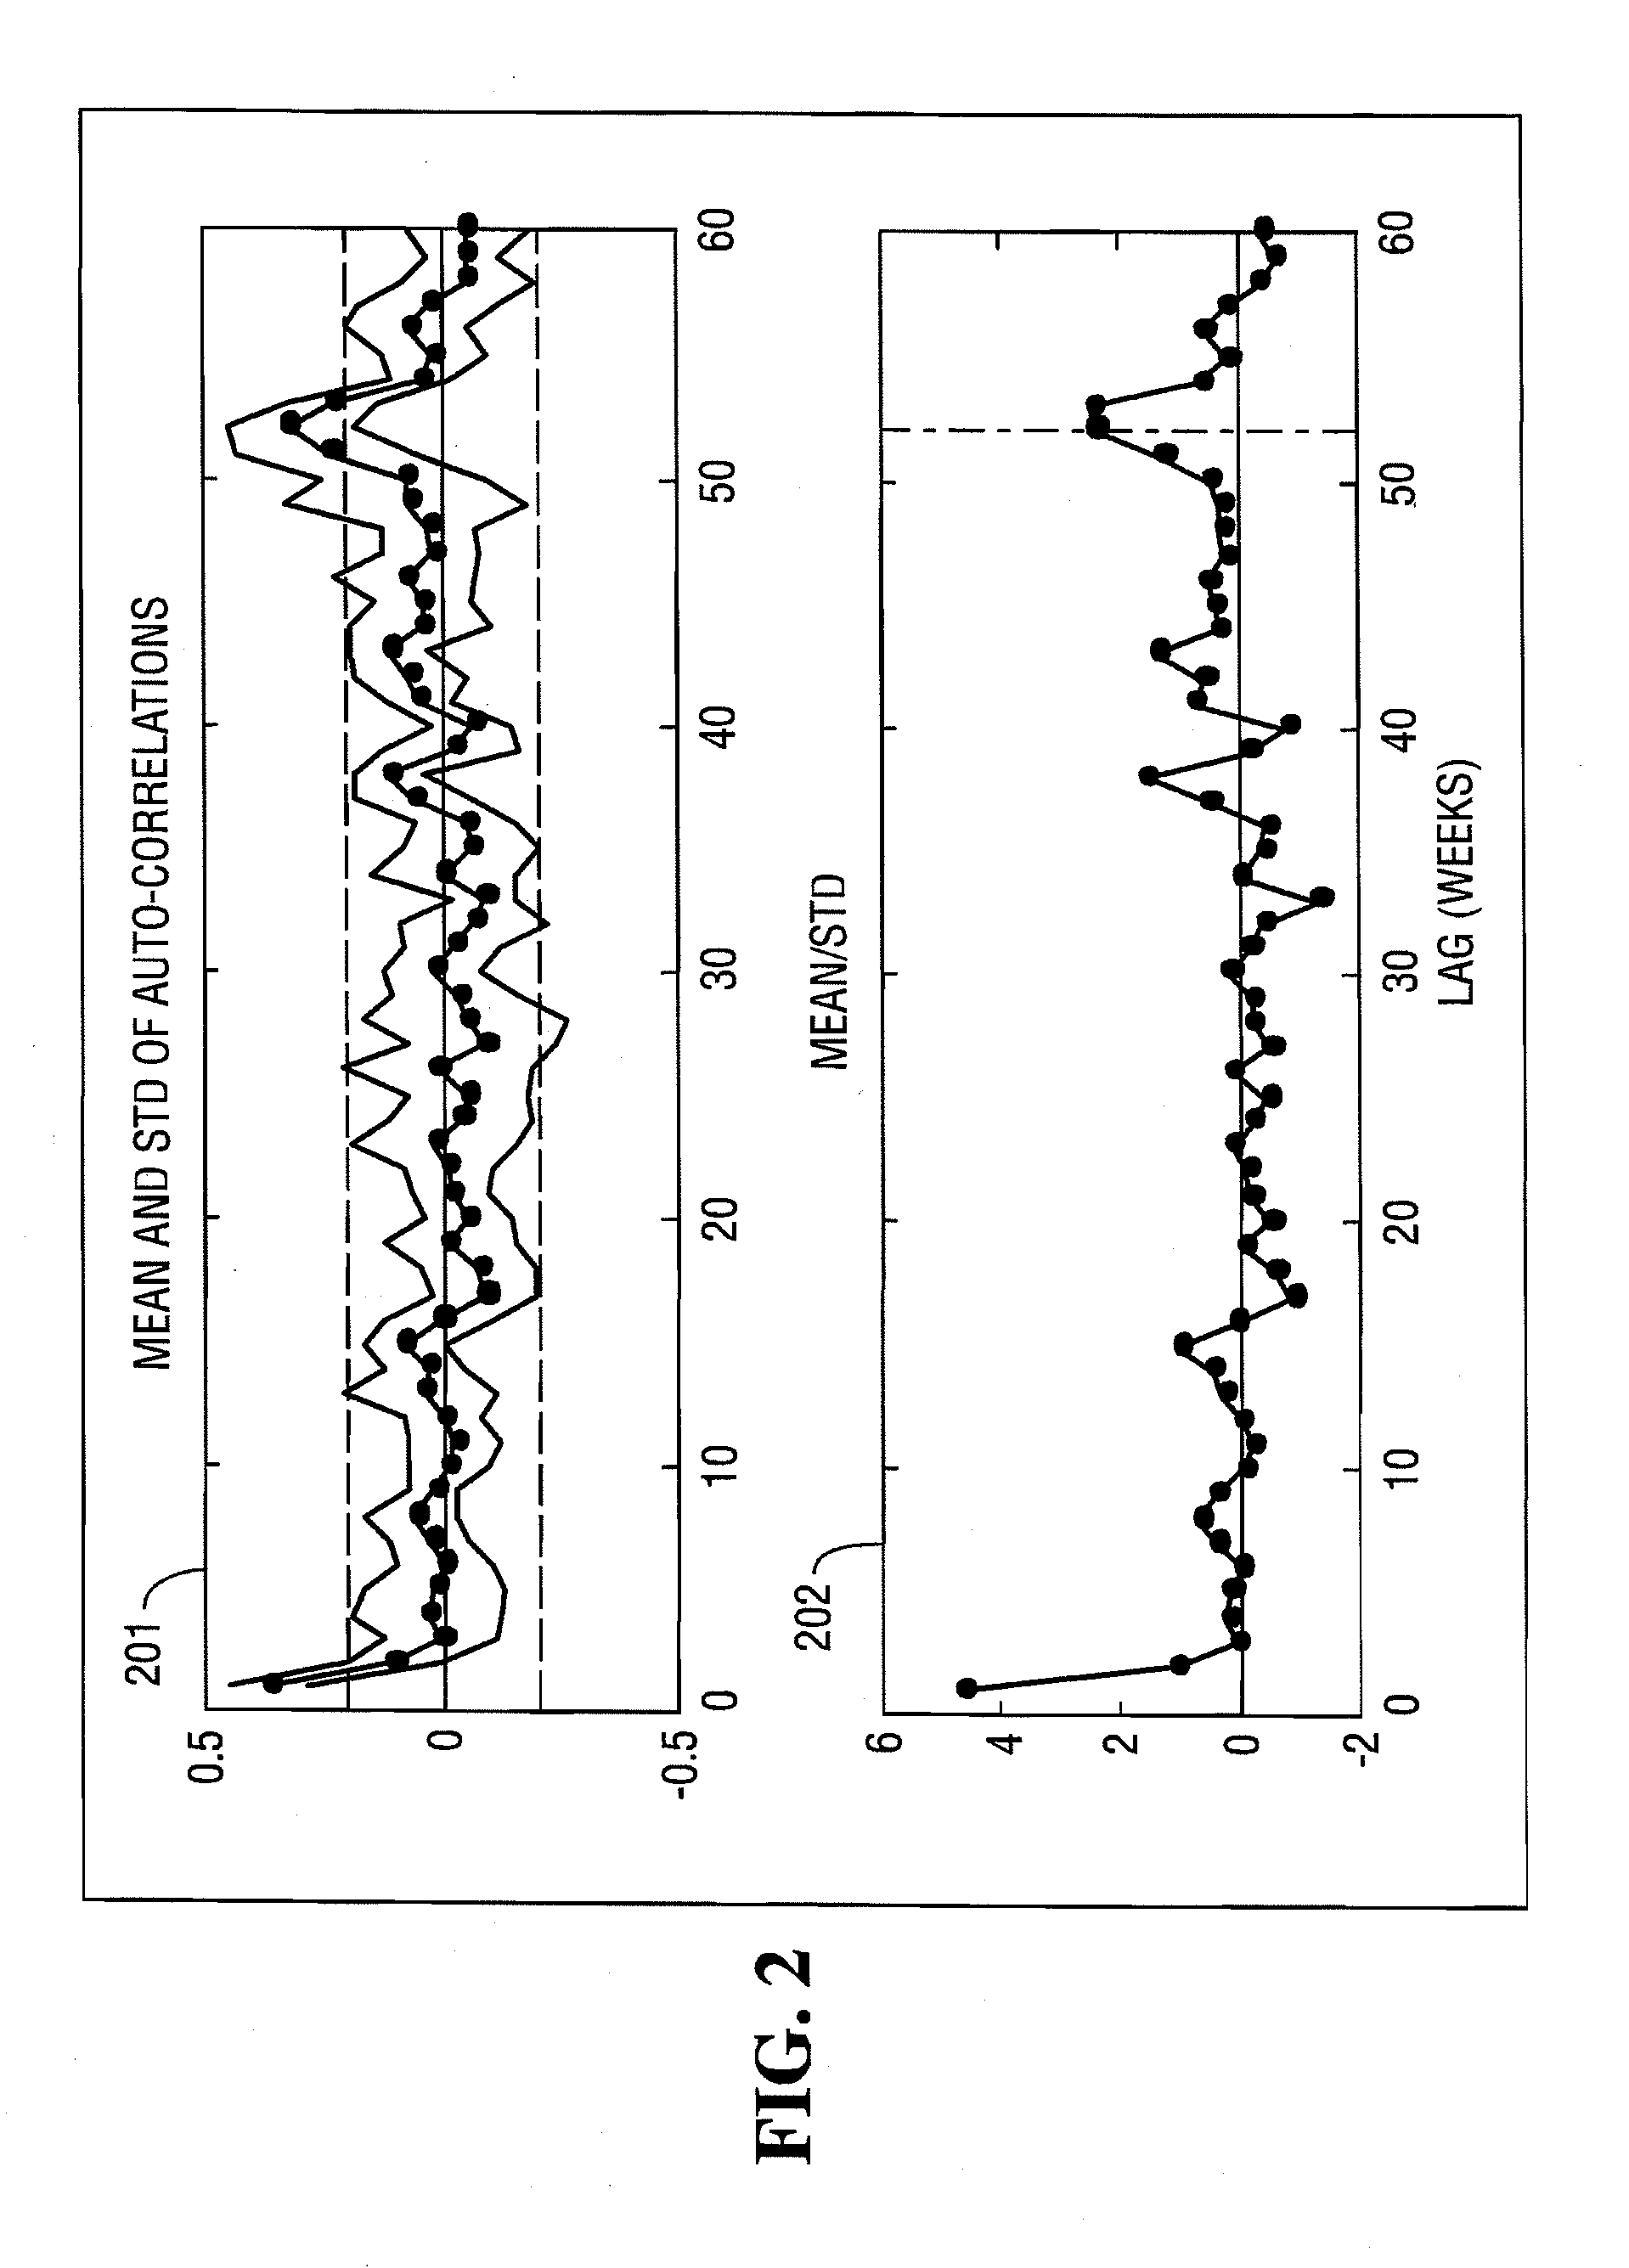 Method for determining daily weighting factors for use in forecasting daily product sales